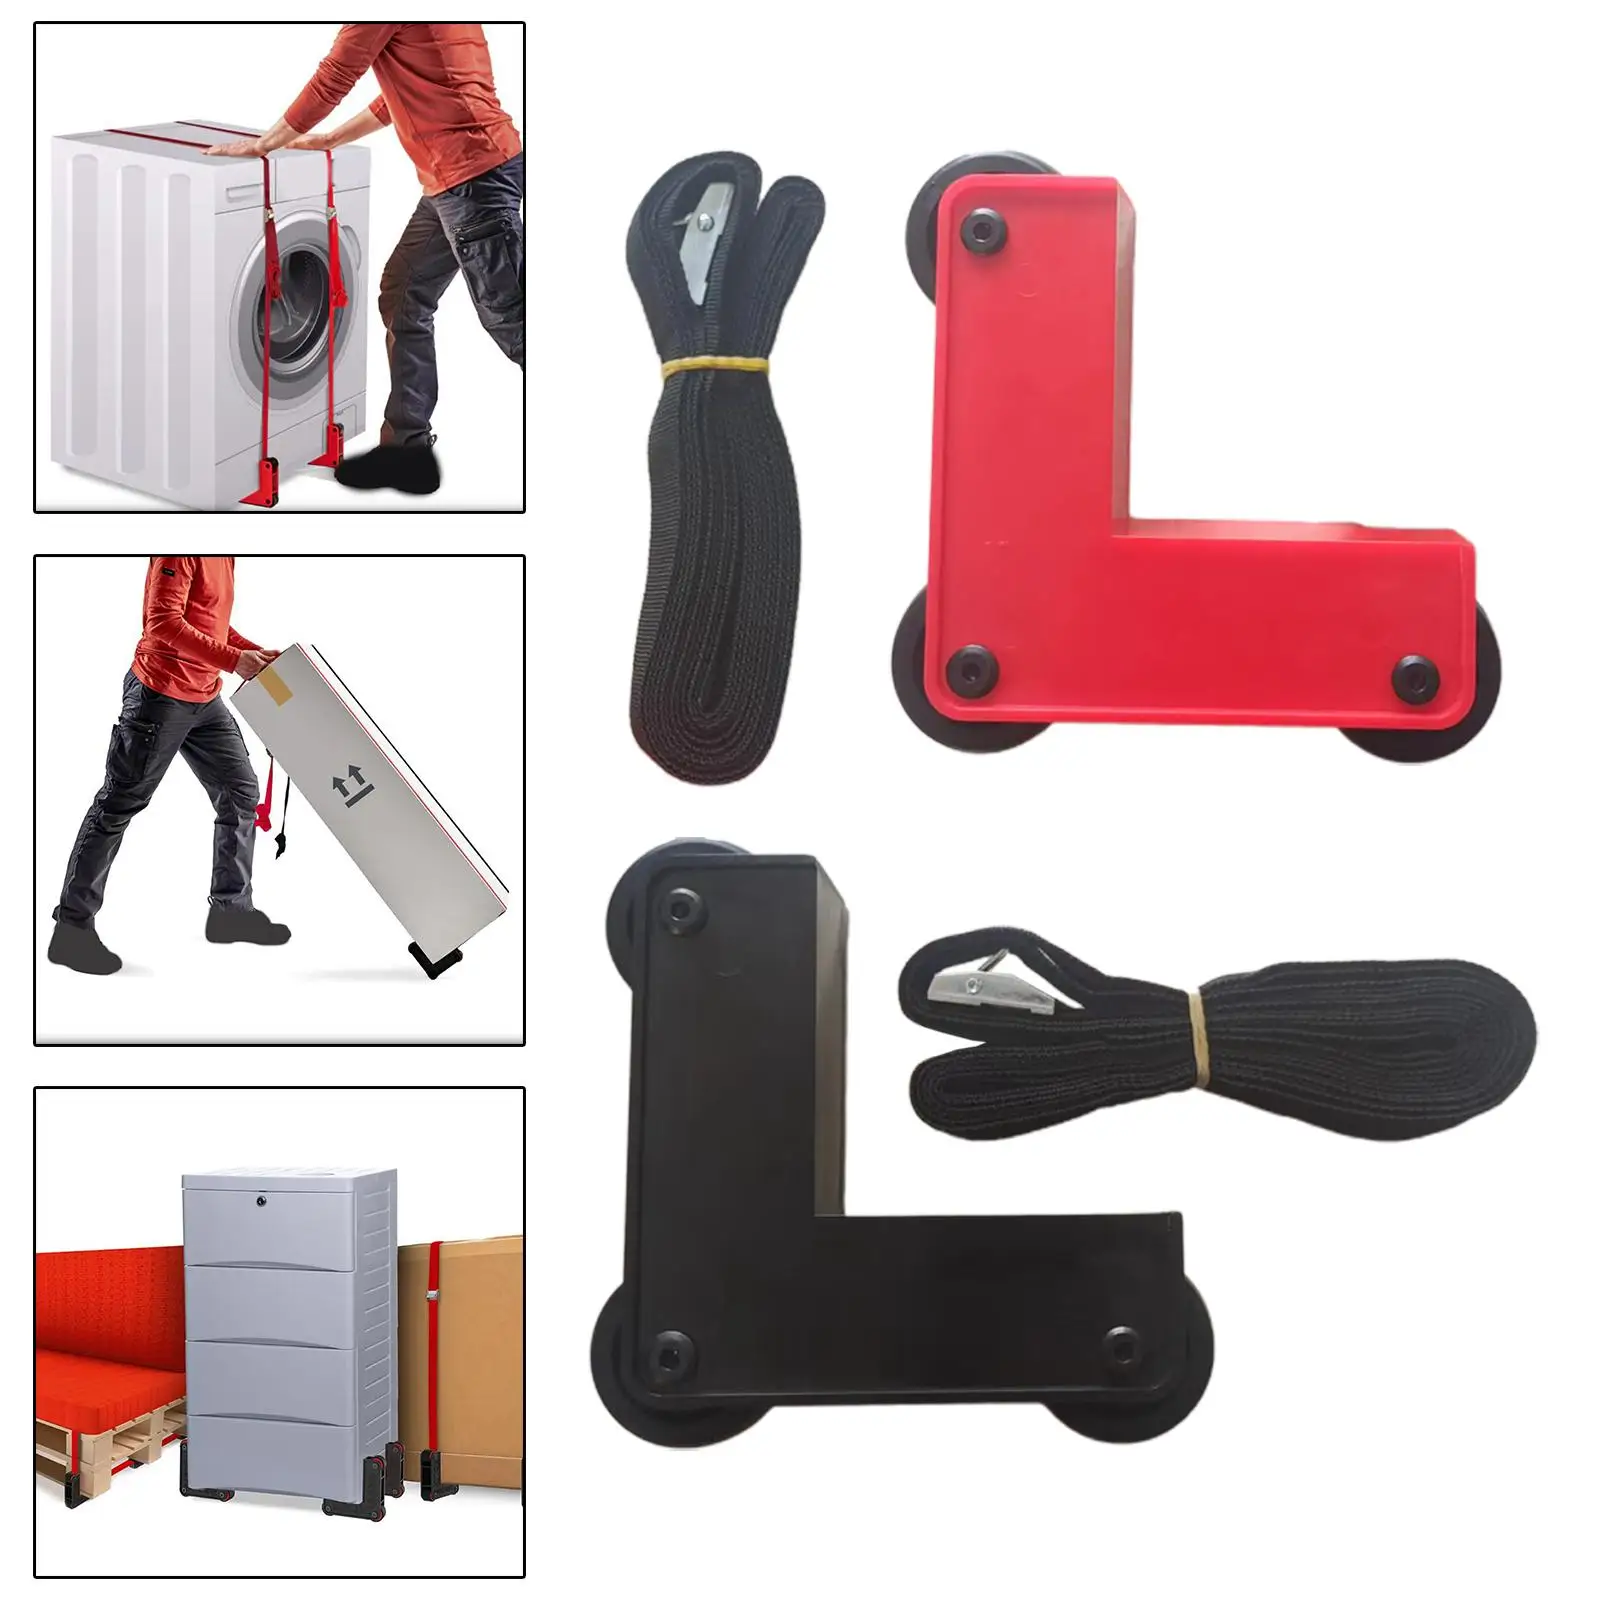 Heavy Duty Heavy Furniture Lifter Multi Function with Lashing Strap Mover Sliders Kit for Furniture Sofa Move Tool